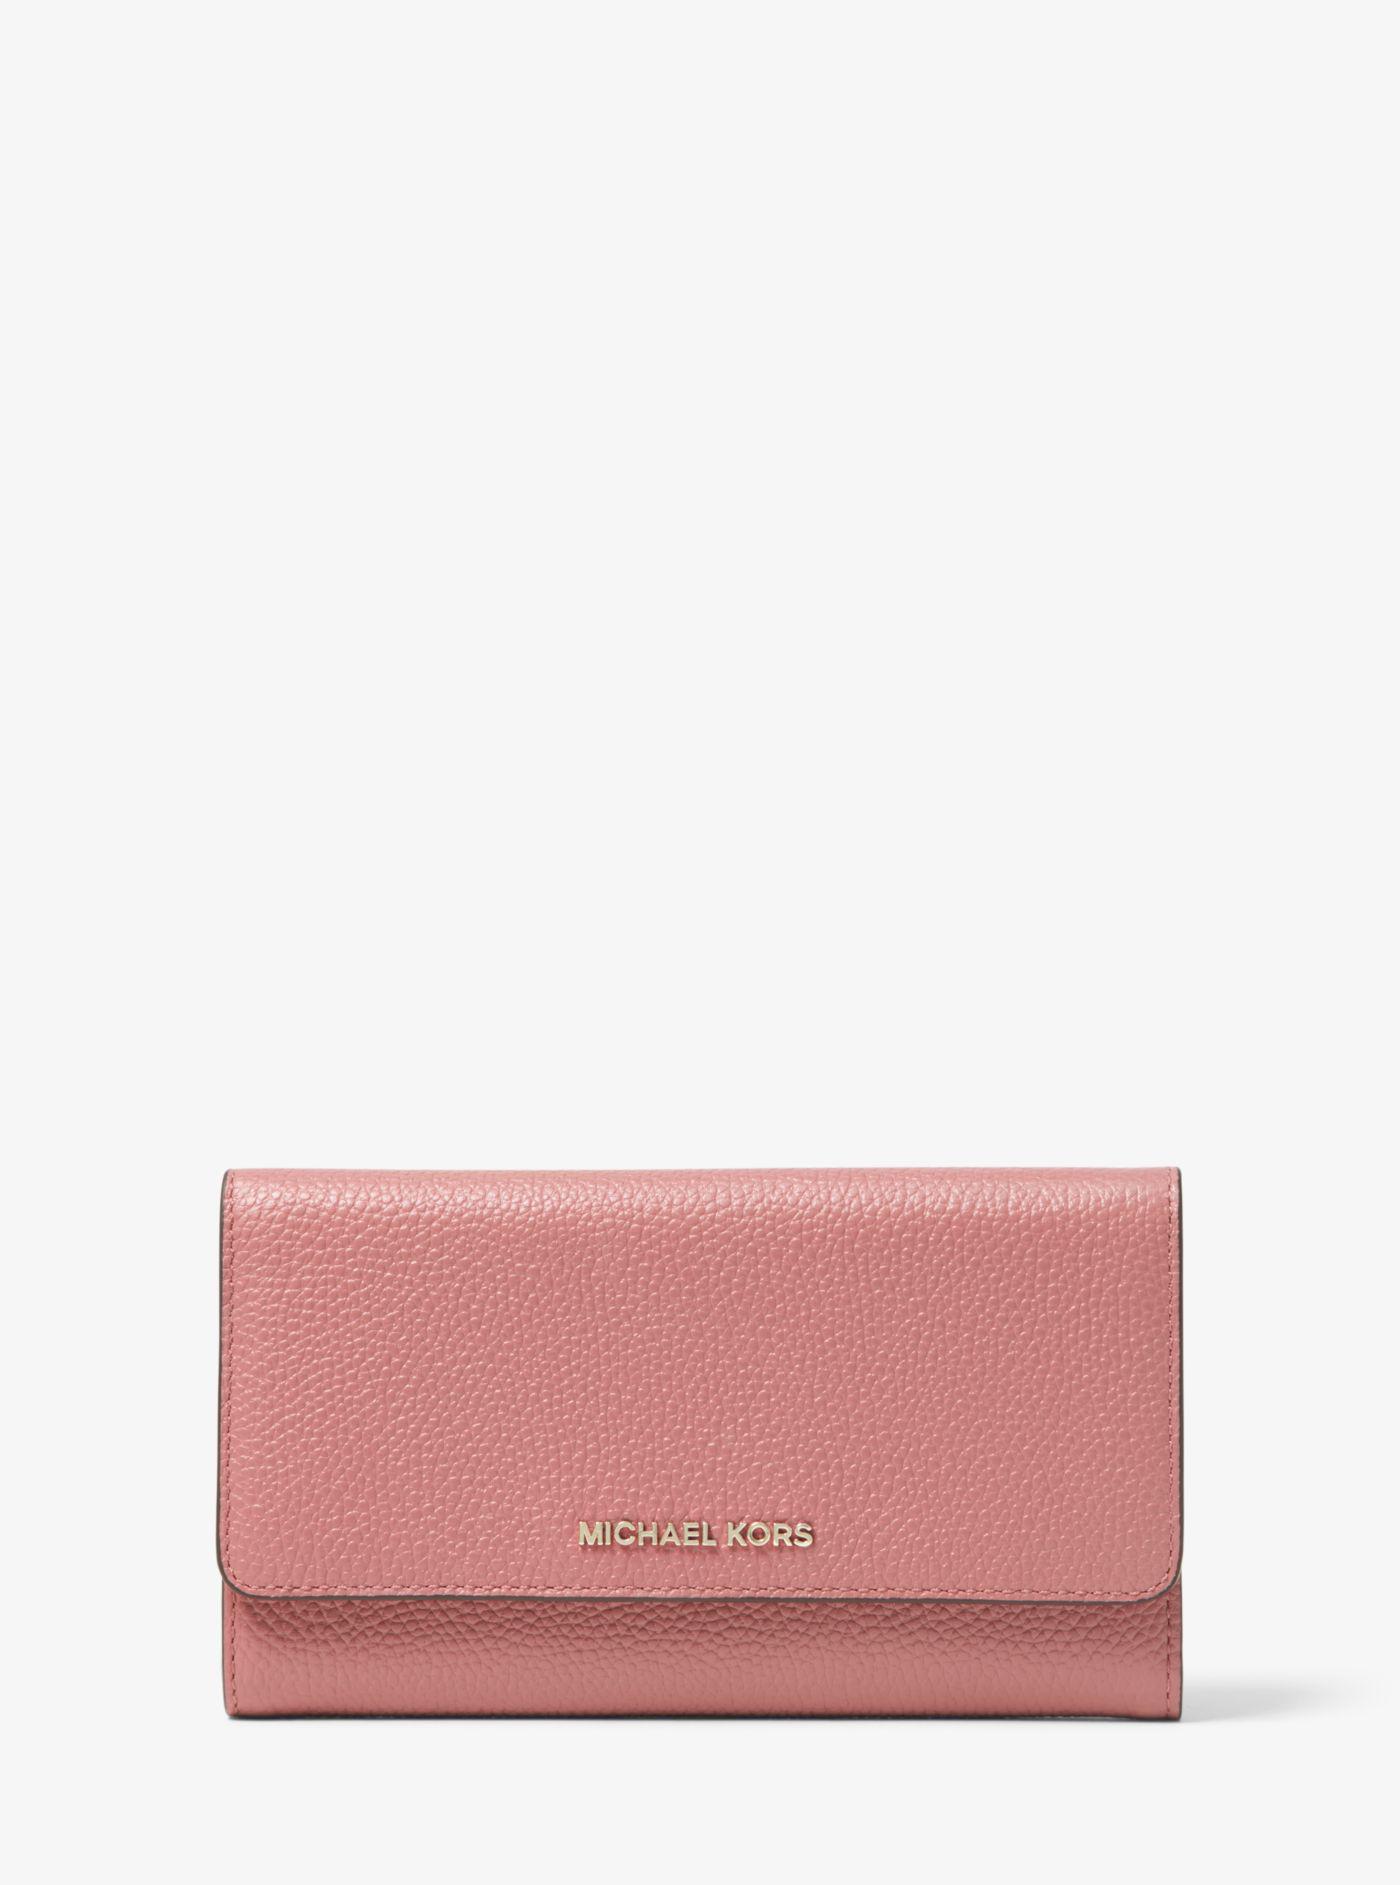 Michael Kors Leather Tri-fold Wallet in 